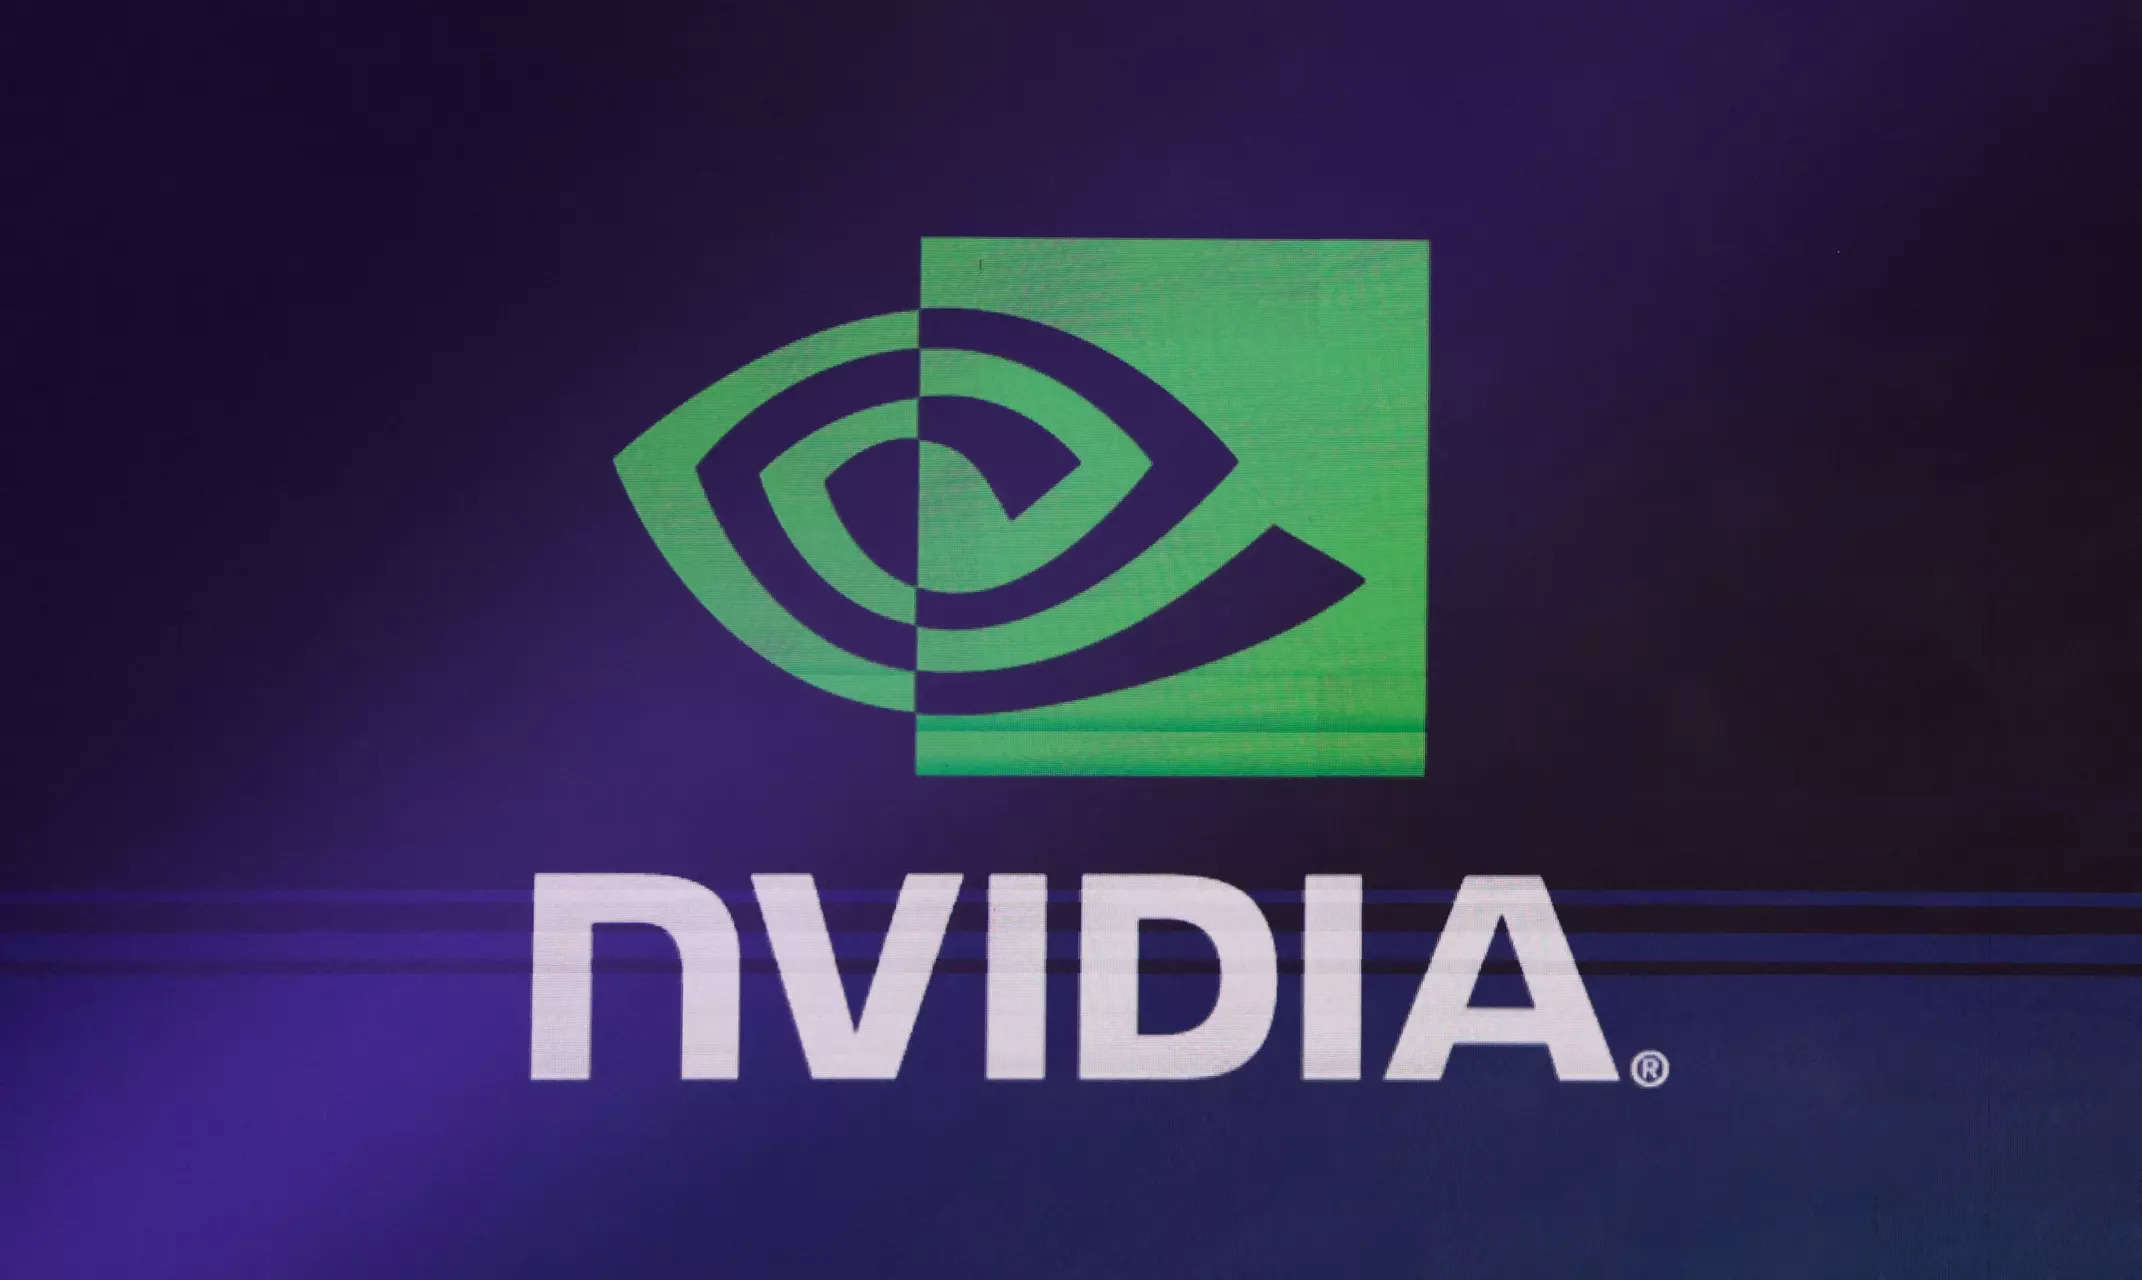 Nvidia: chipmaker's strategic AI moves result in a tech position